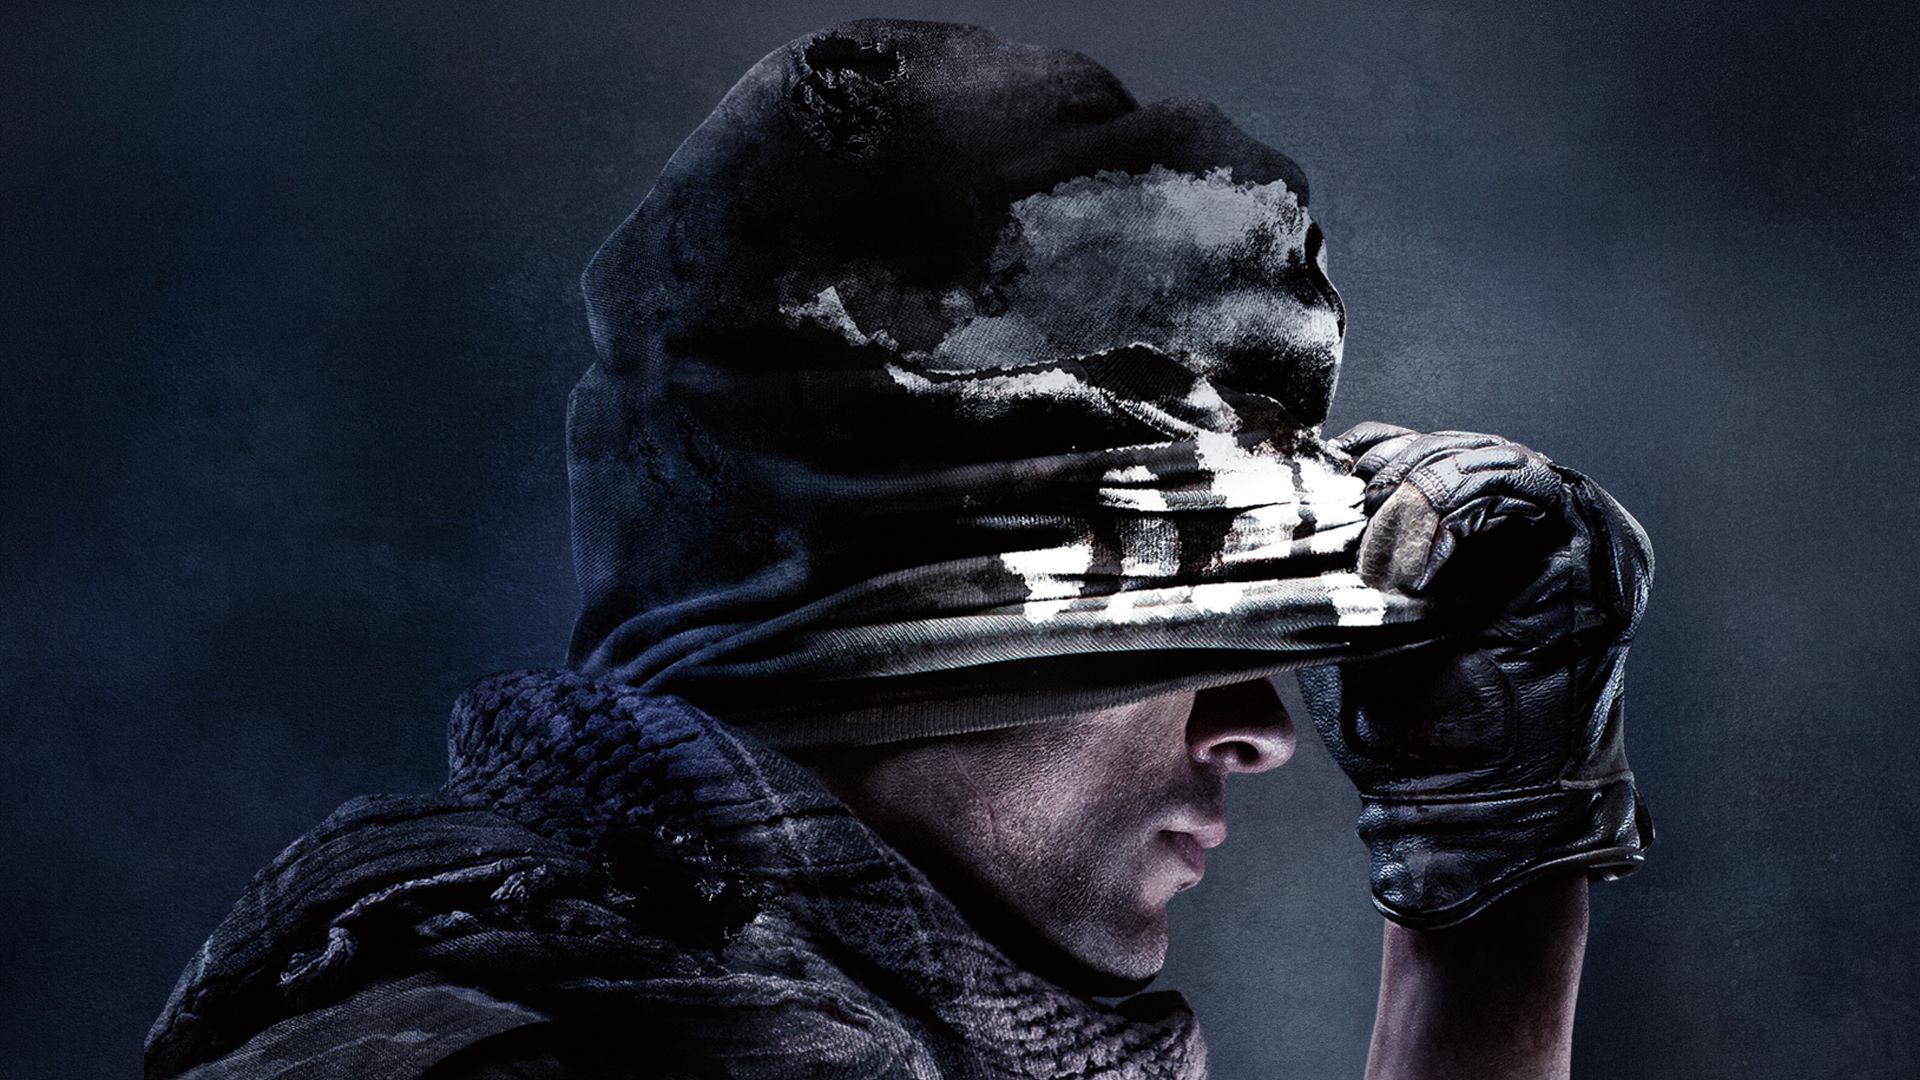 Report: Call of Duty 2019 is not Call of Duty: Ghosts 2